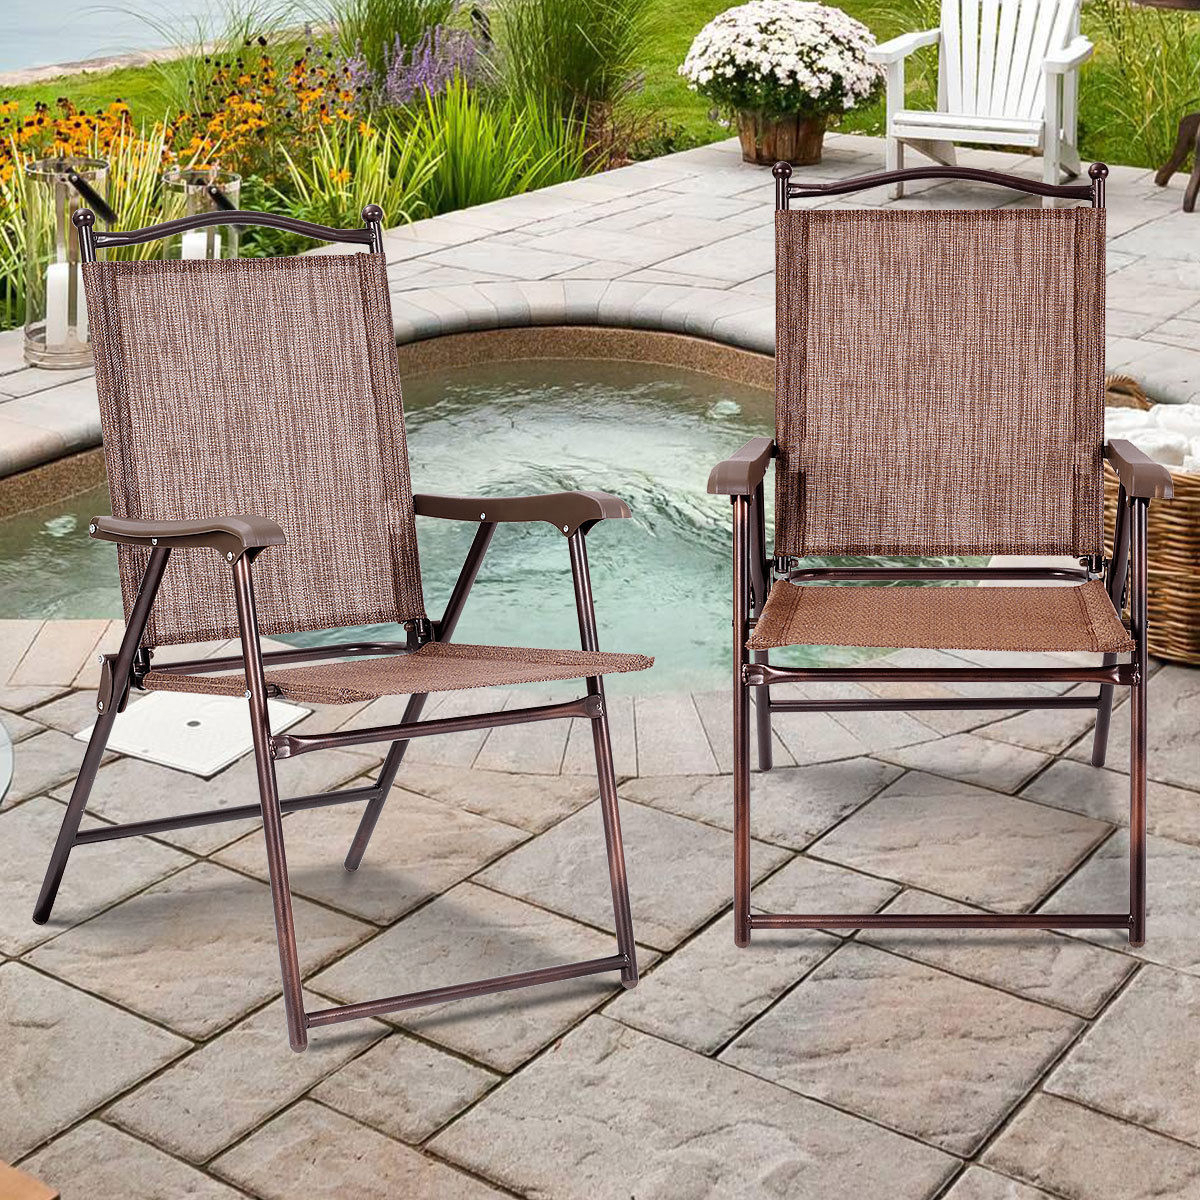 Set Of 2 Folding Patio Furniture Sling Back Chairs Outdoors Brown